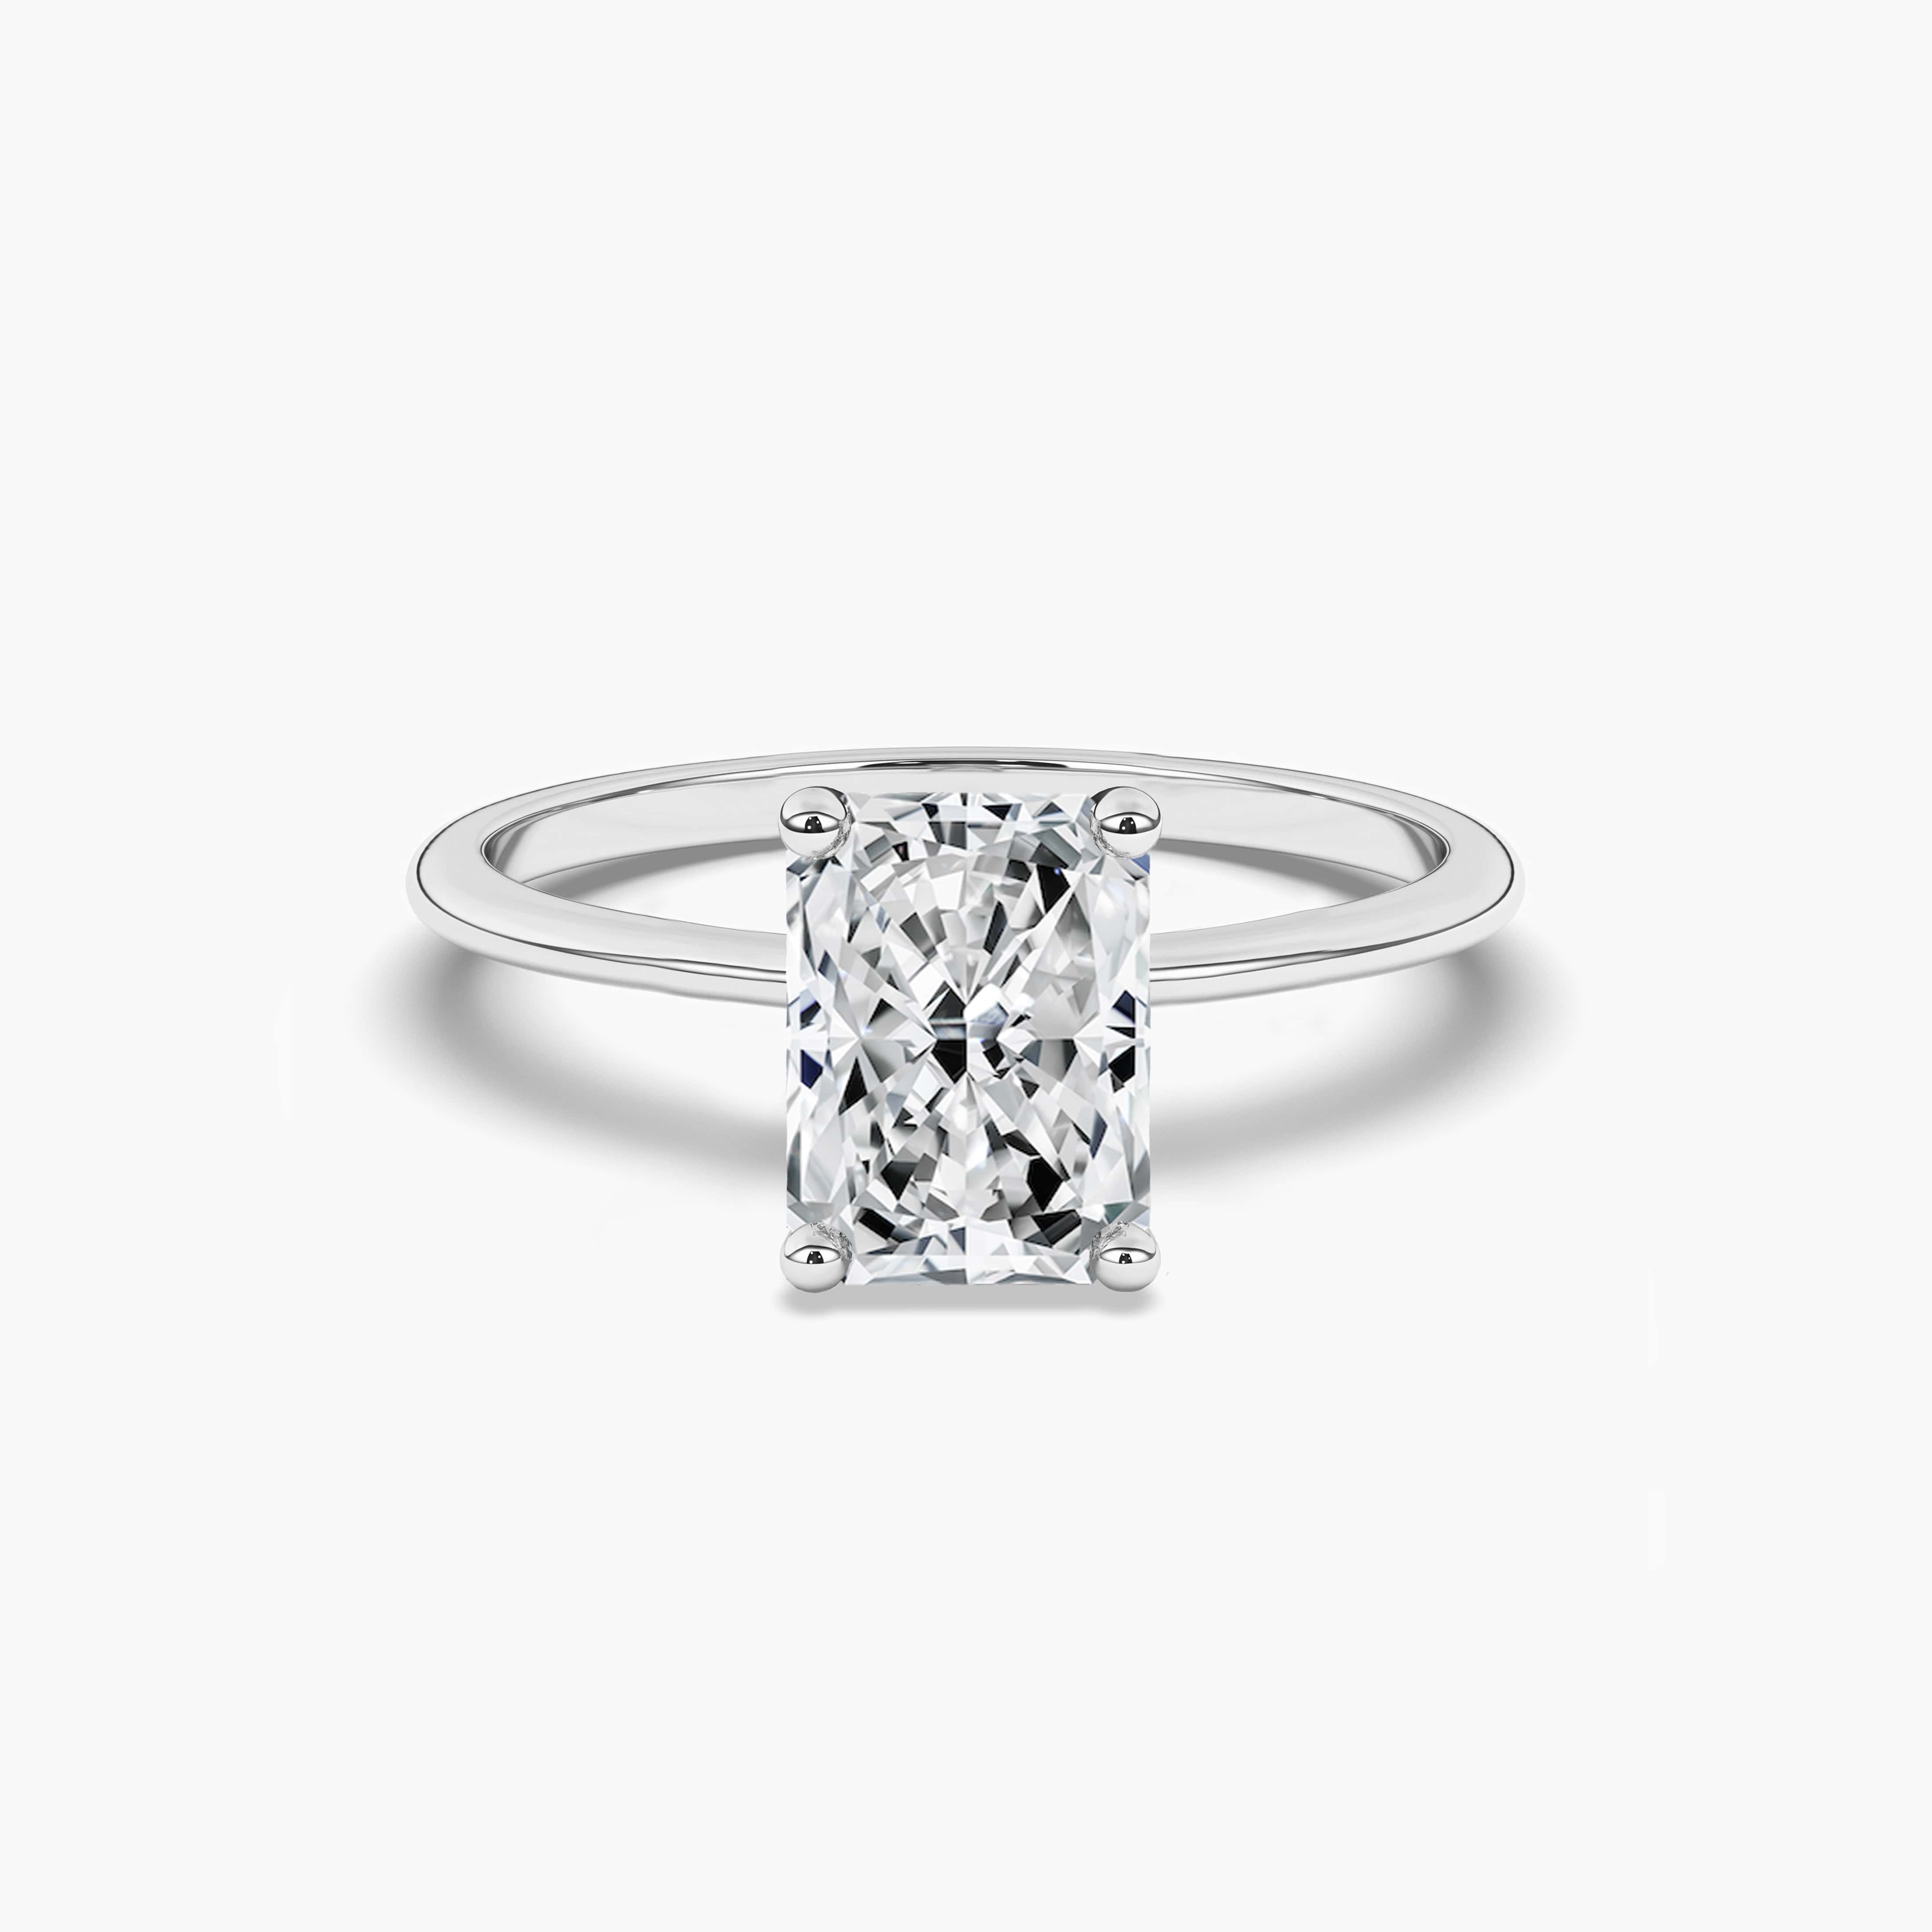 Radiant cut diamond solitaire rings for women